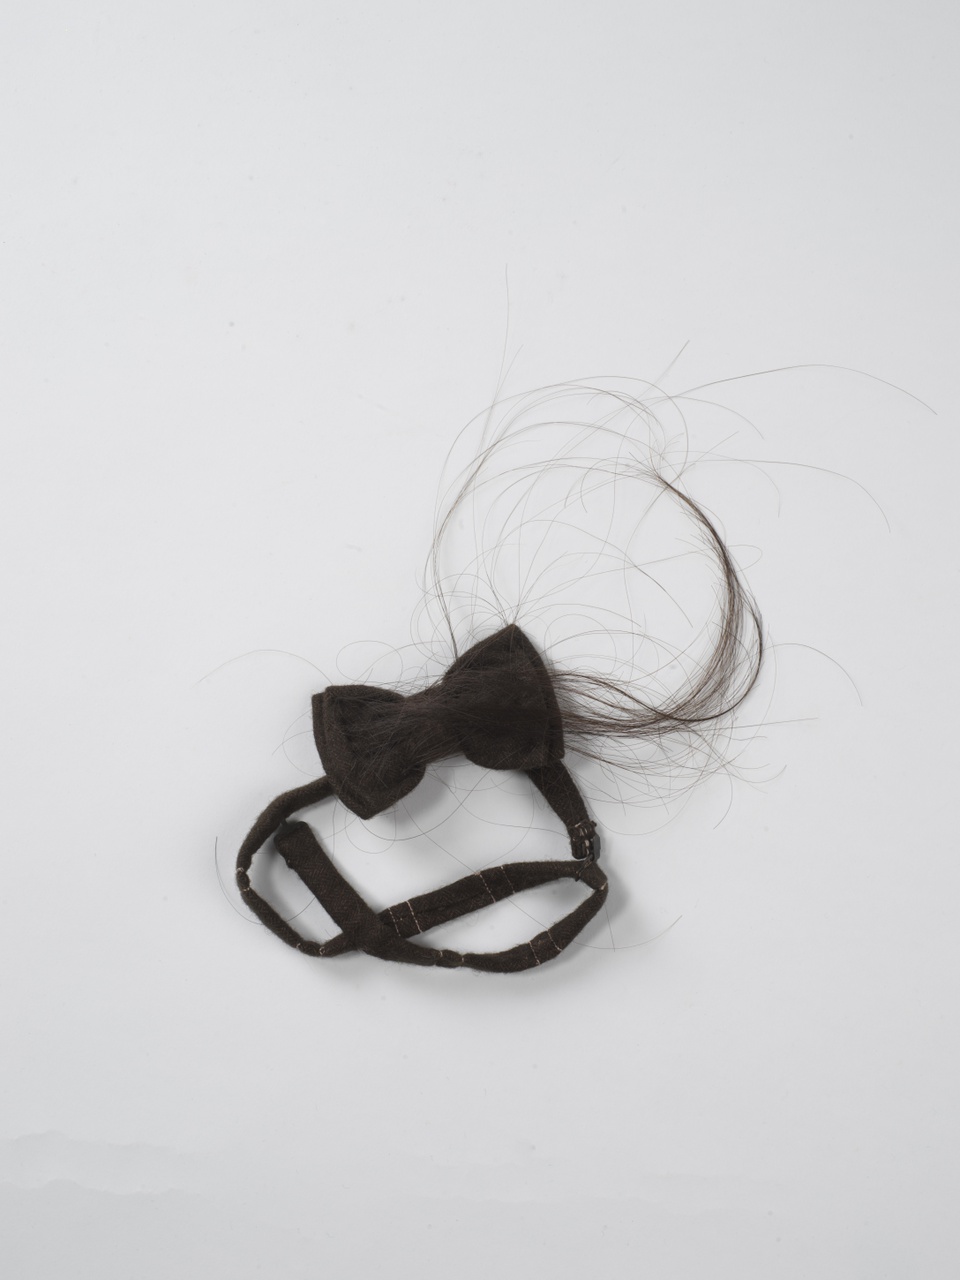 Project 000 - 004 Hypertrichosis bow tie 2.0